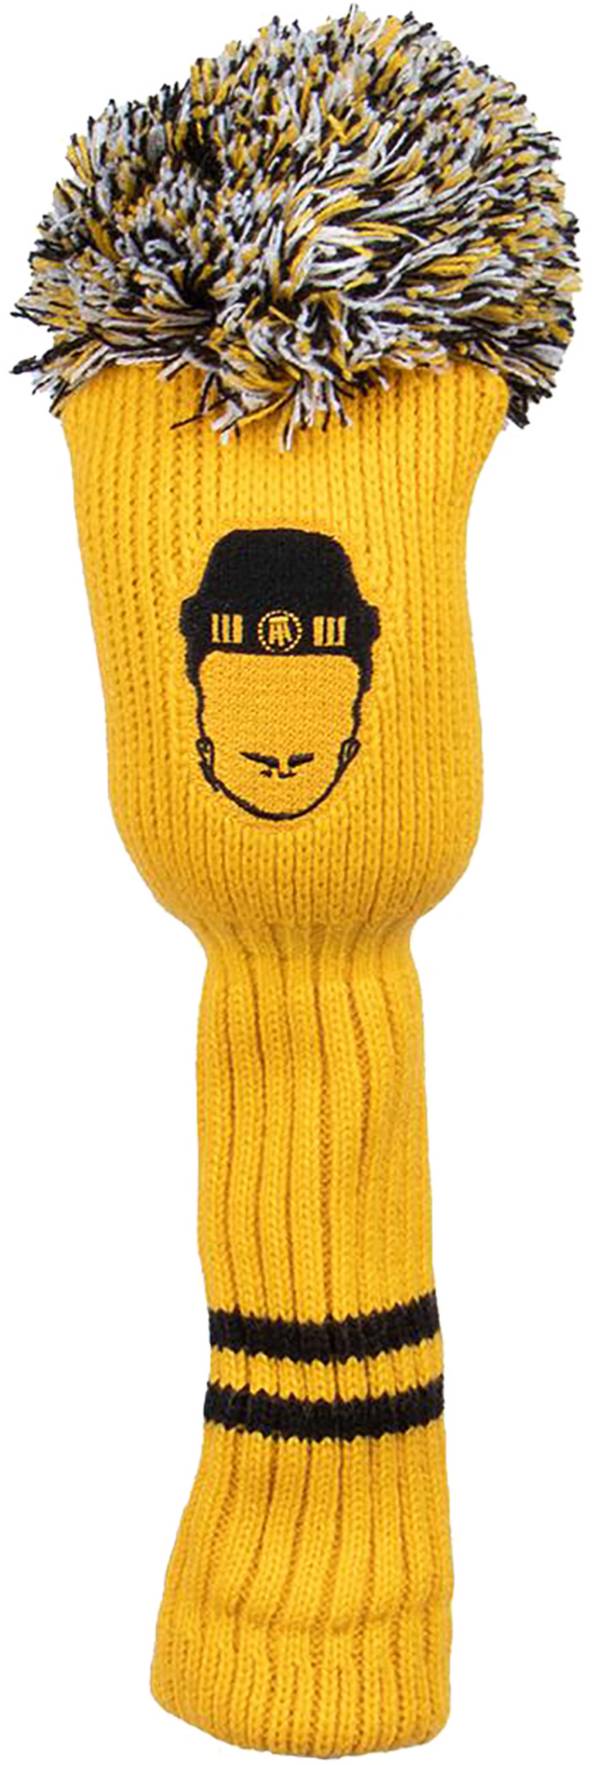 Barstool Sports Spittin' Chiclets Knit Fairway Wood Headcover product image